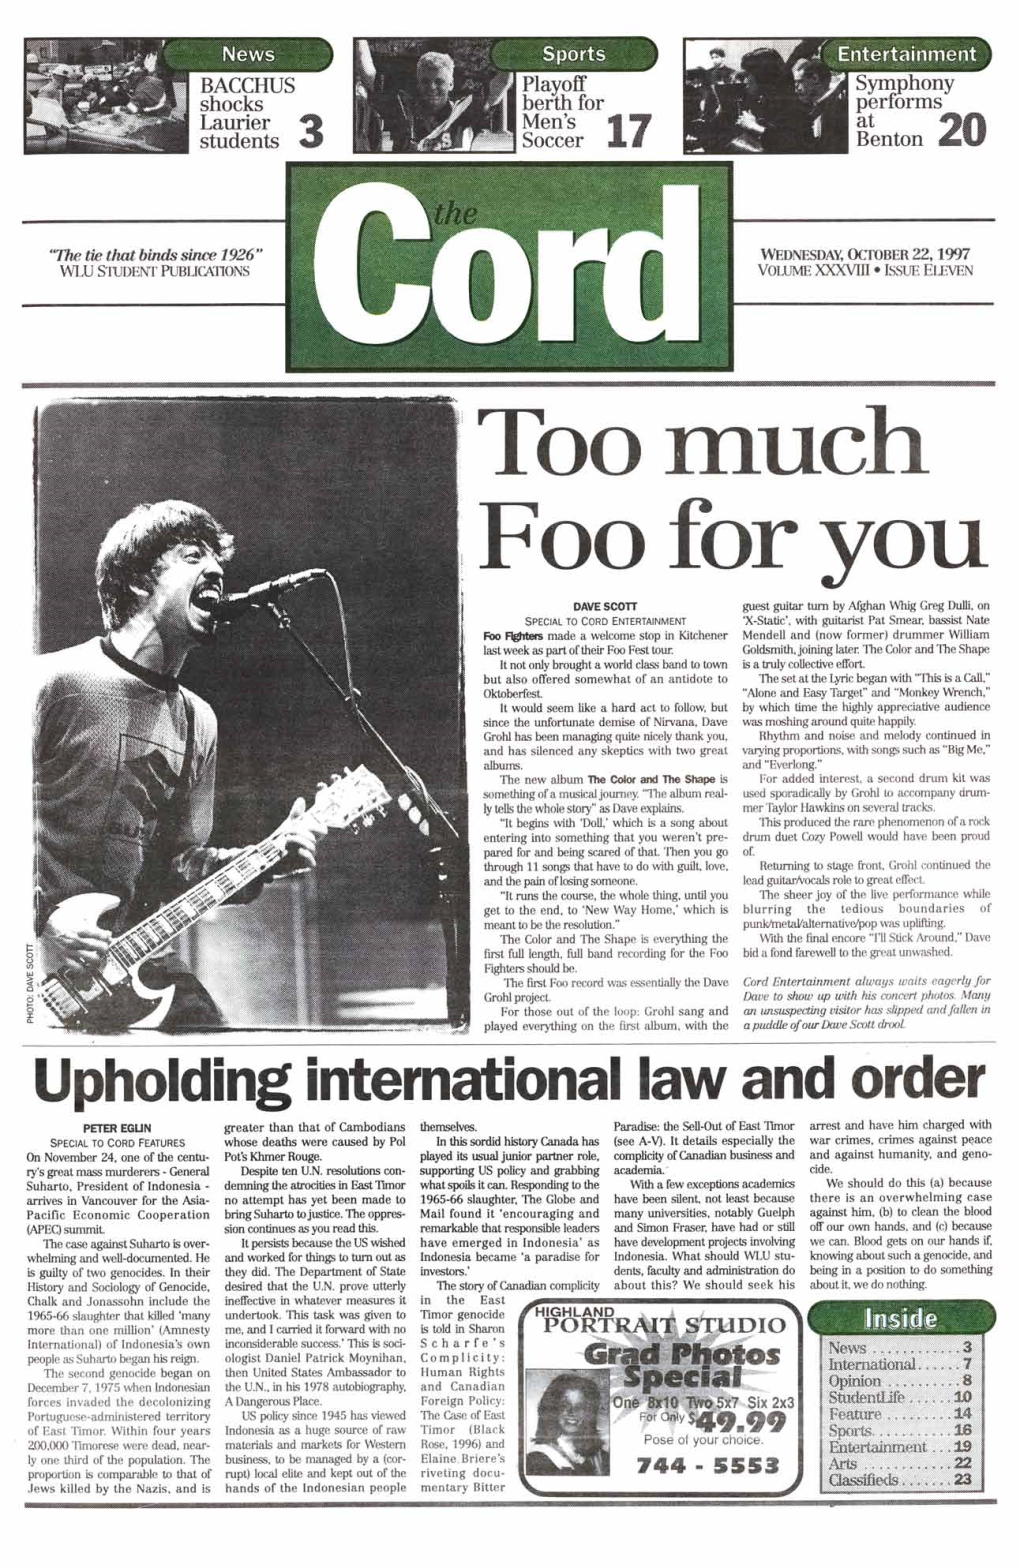 The Cord Weekly (October 22, 1997)